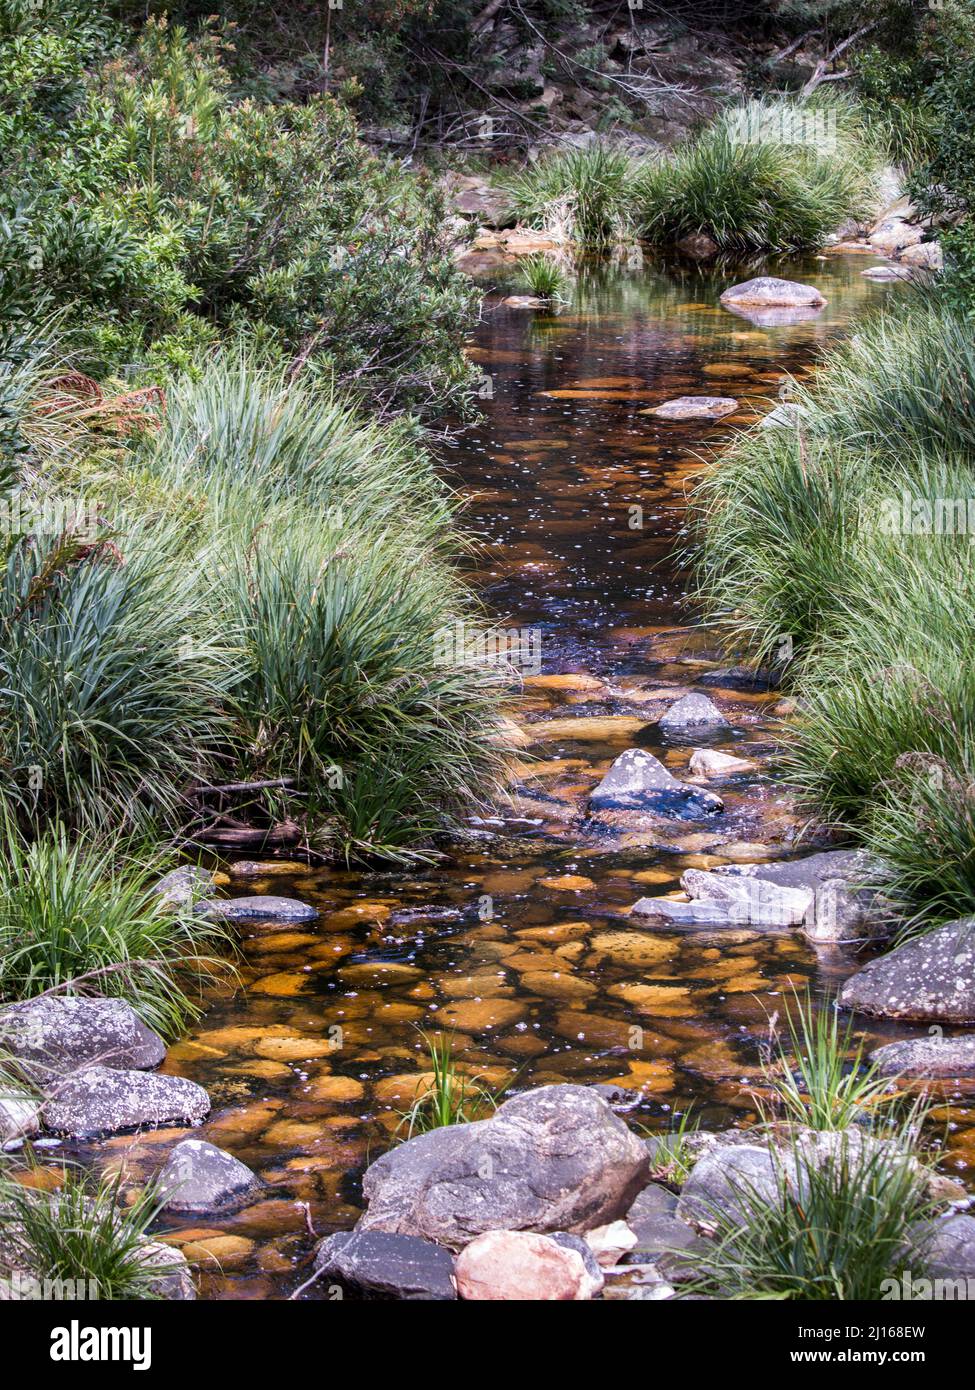 A tranquil river in the forest with densely growing green plants and grasses on its banks and pebbles in the clear water Stock Photo